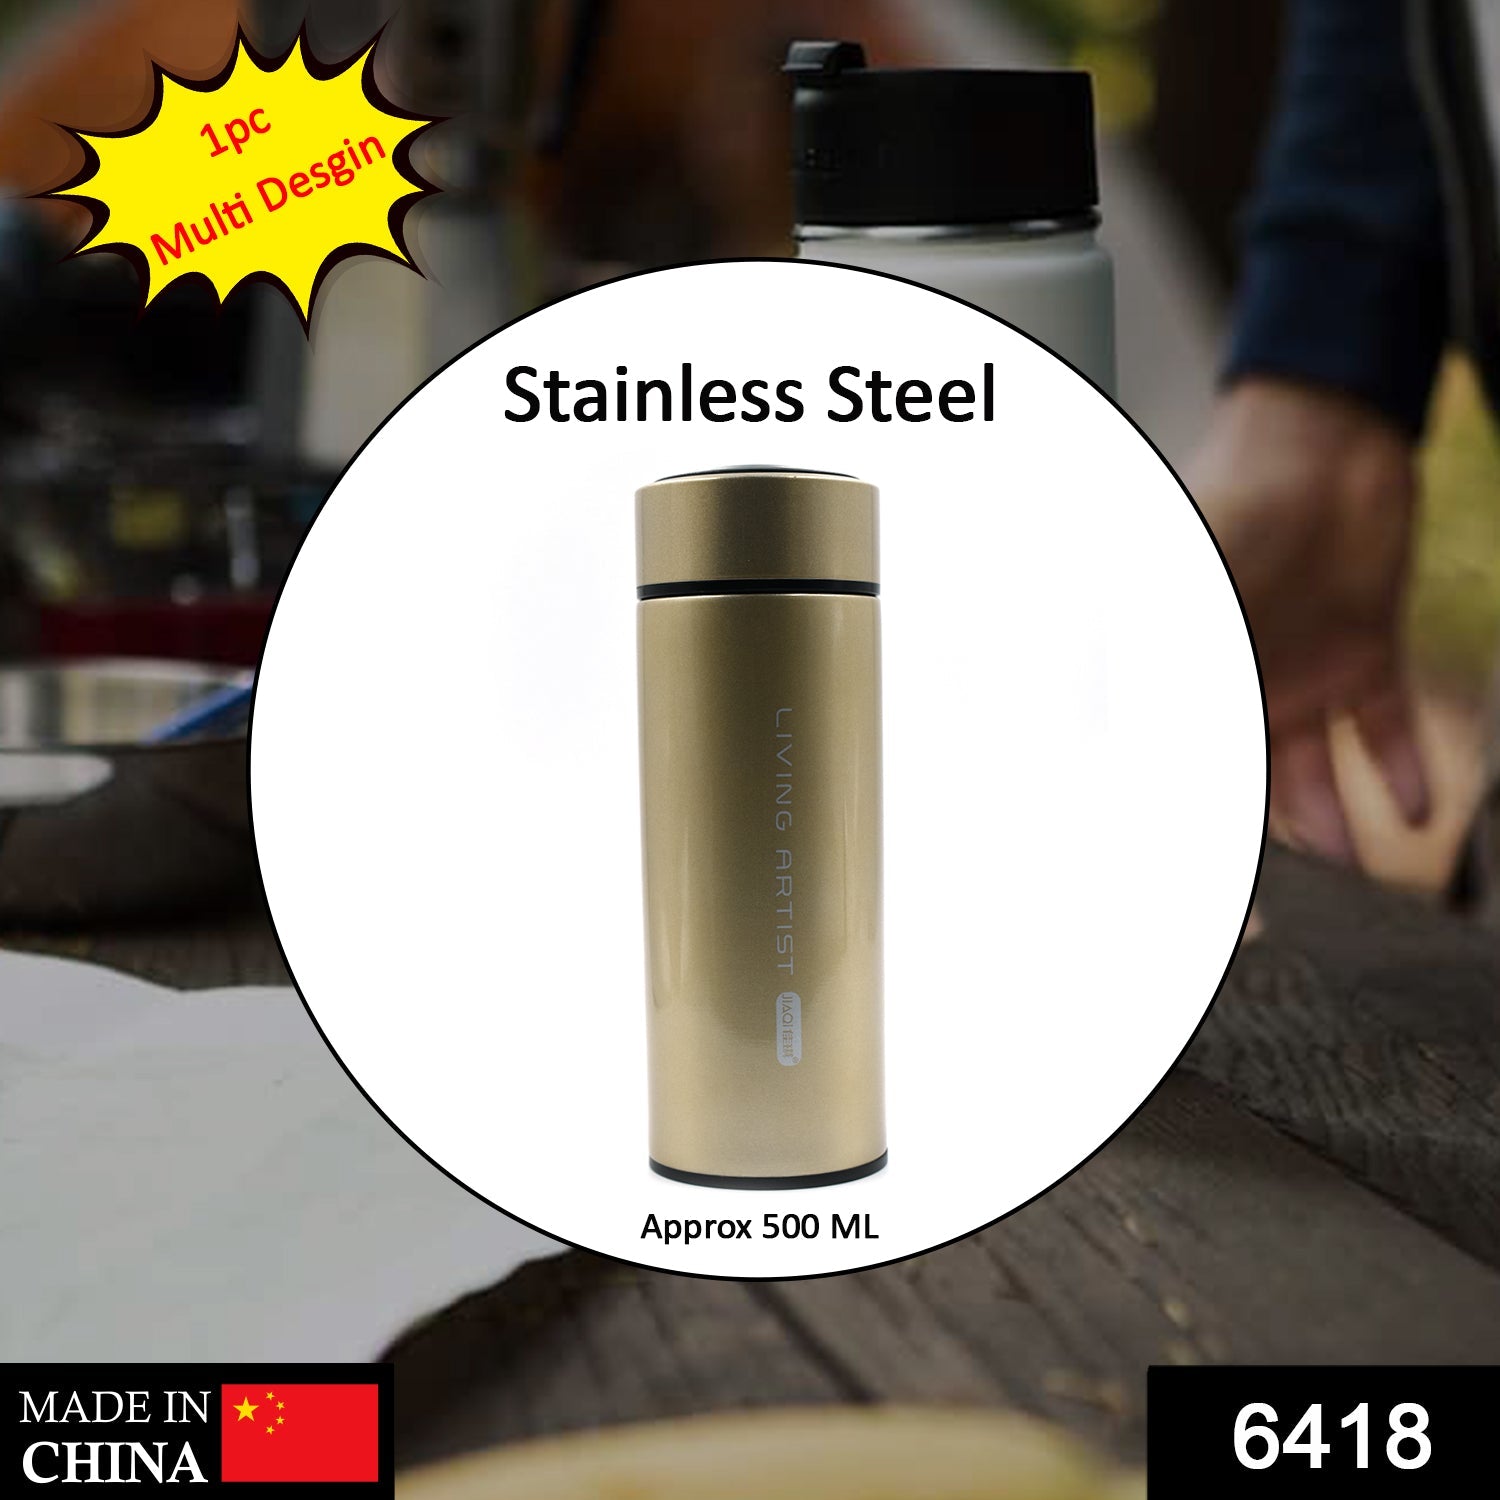 6418 Stainless steel Bottles 500Ml Approx. For Storing Water And Some Other Types Of Beverages Etc.